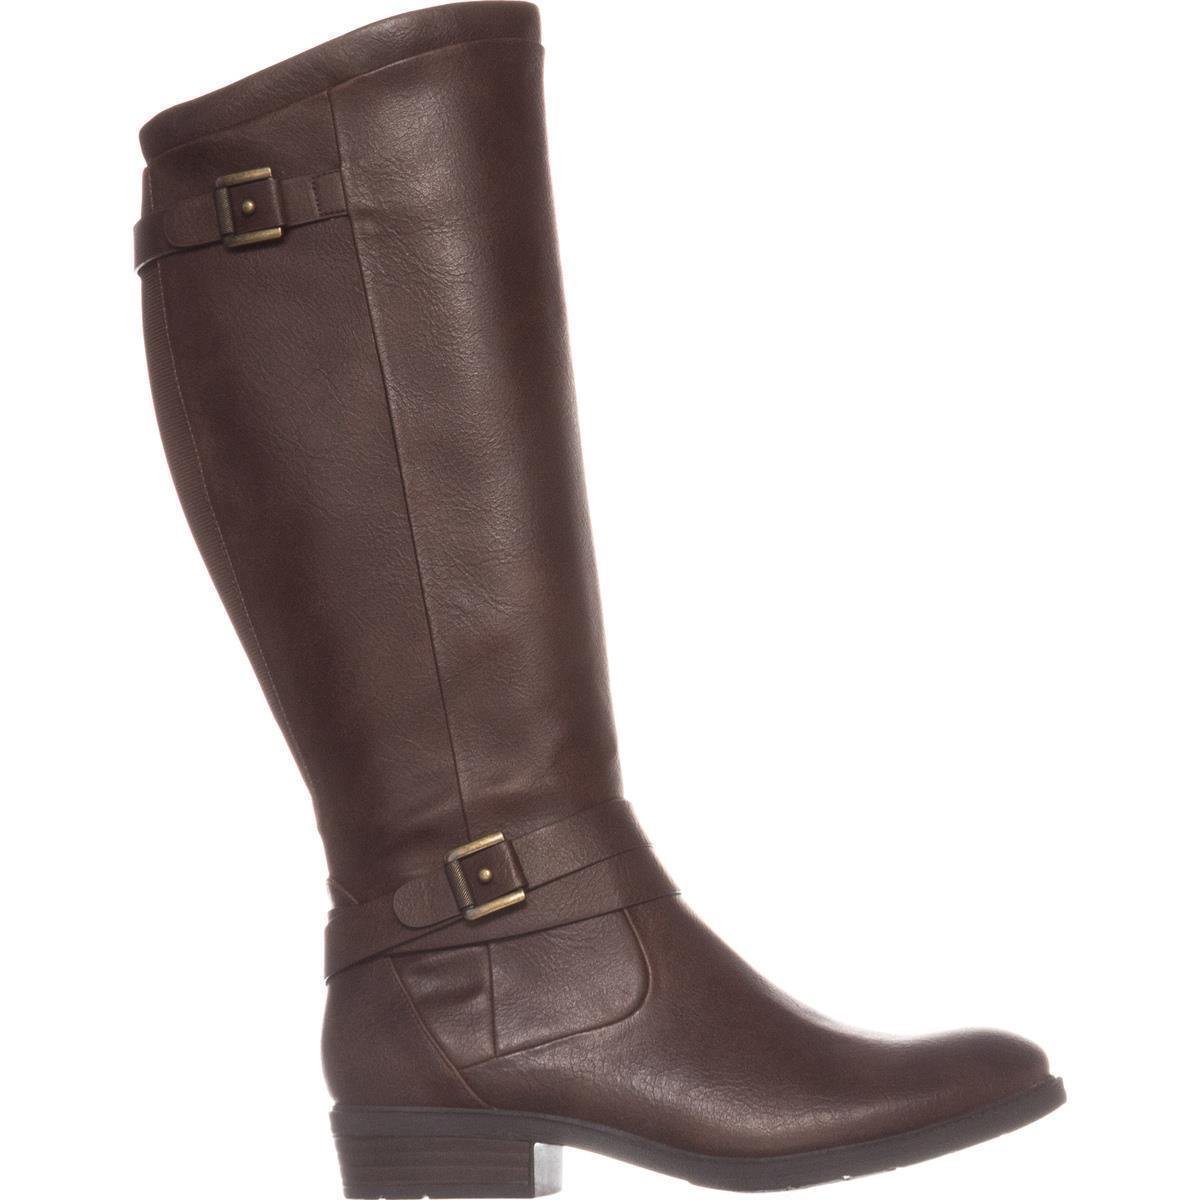 Bare Traps Womens Yalina Closed Toe Knee High Riding Boots, Dark Brown ...